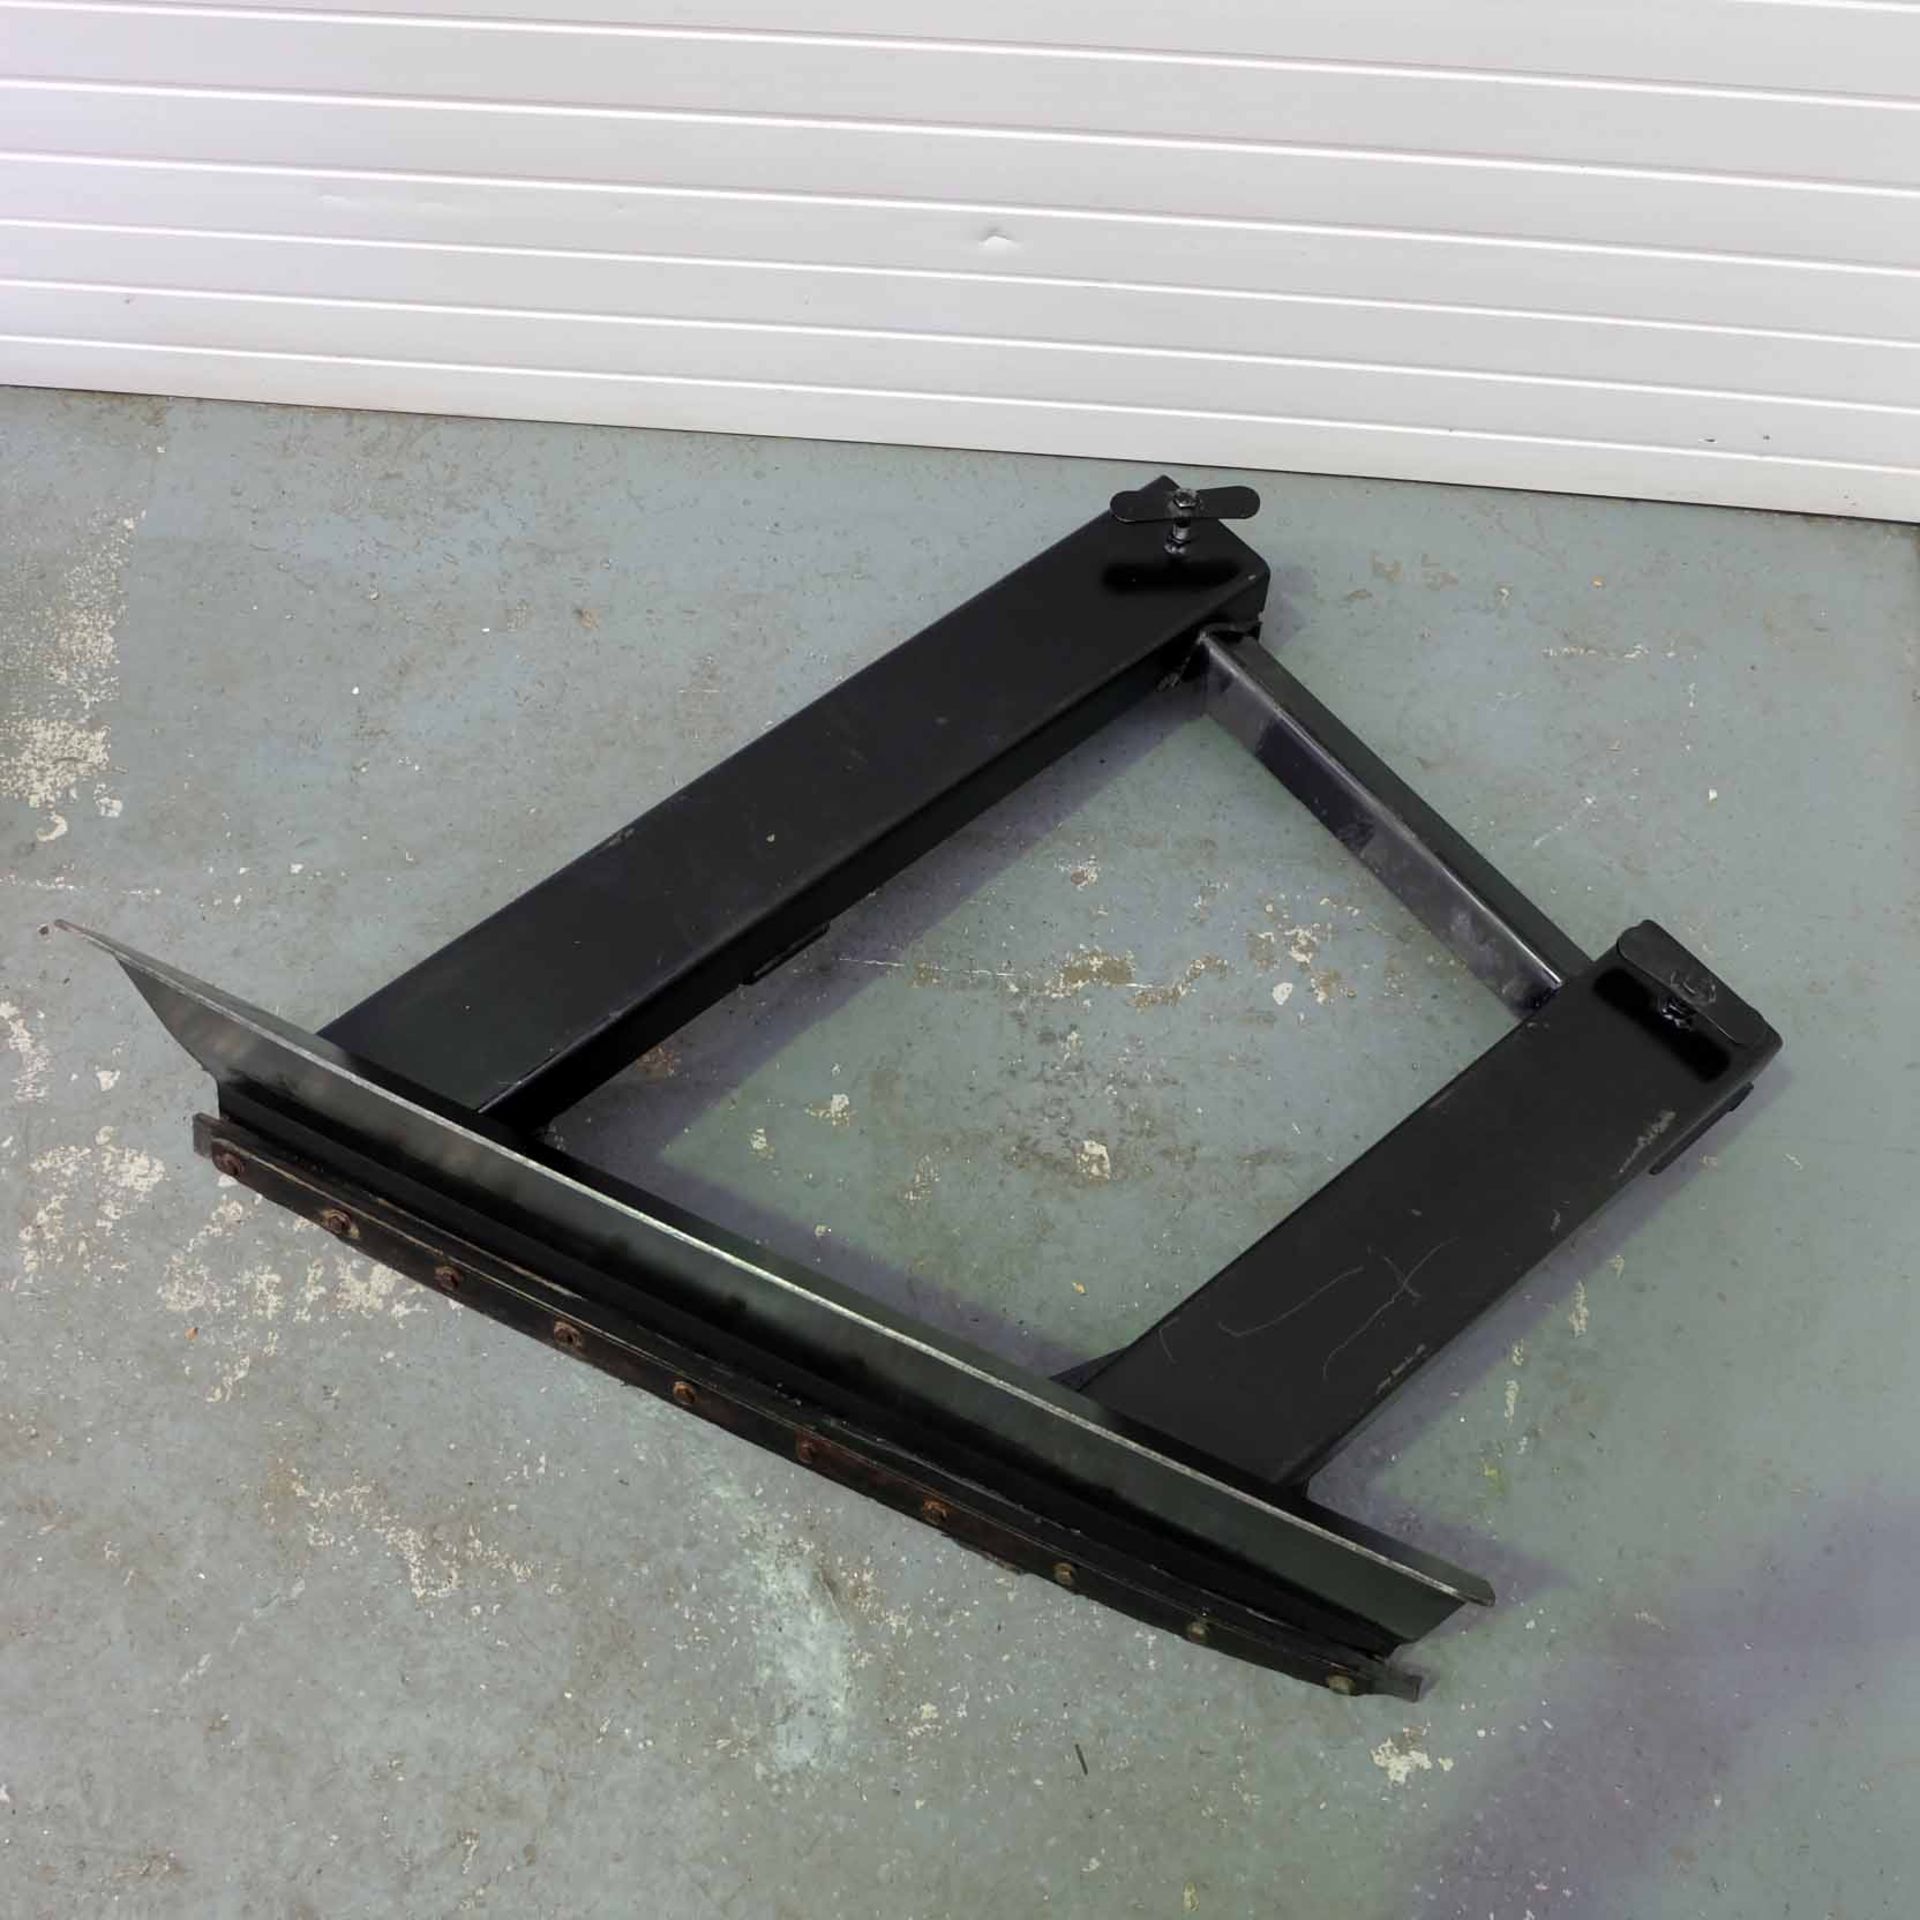 Snow Plow Attachment for Fork Lift Trucks. 1200mm W x 500mm H. - Image 4 of 4